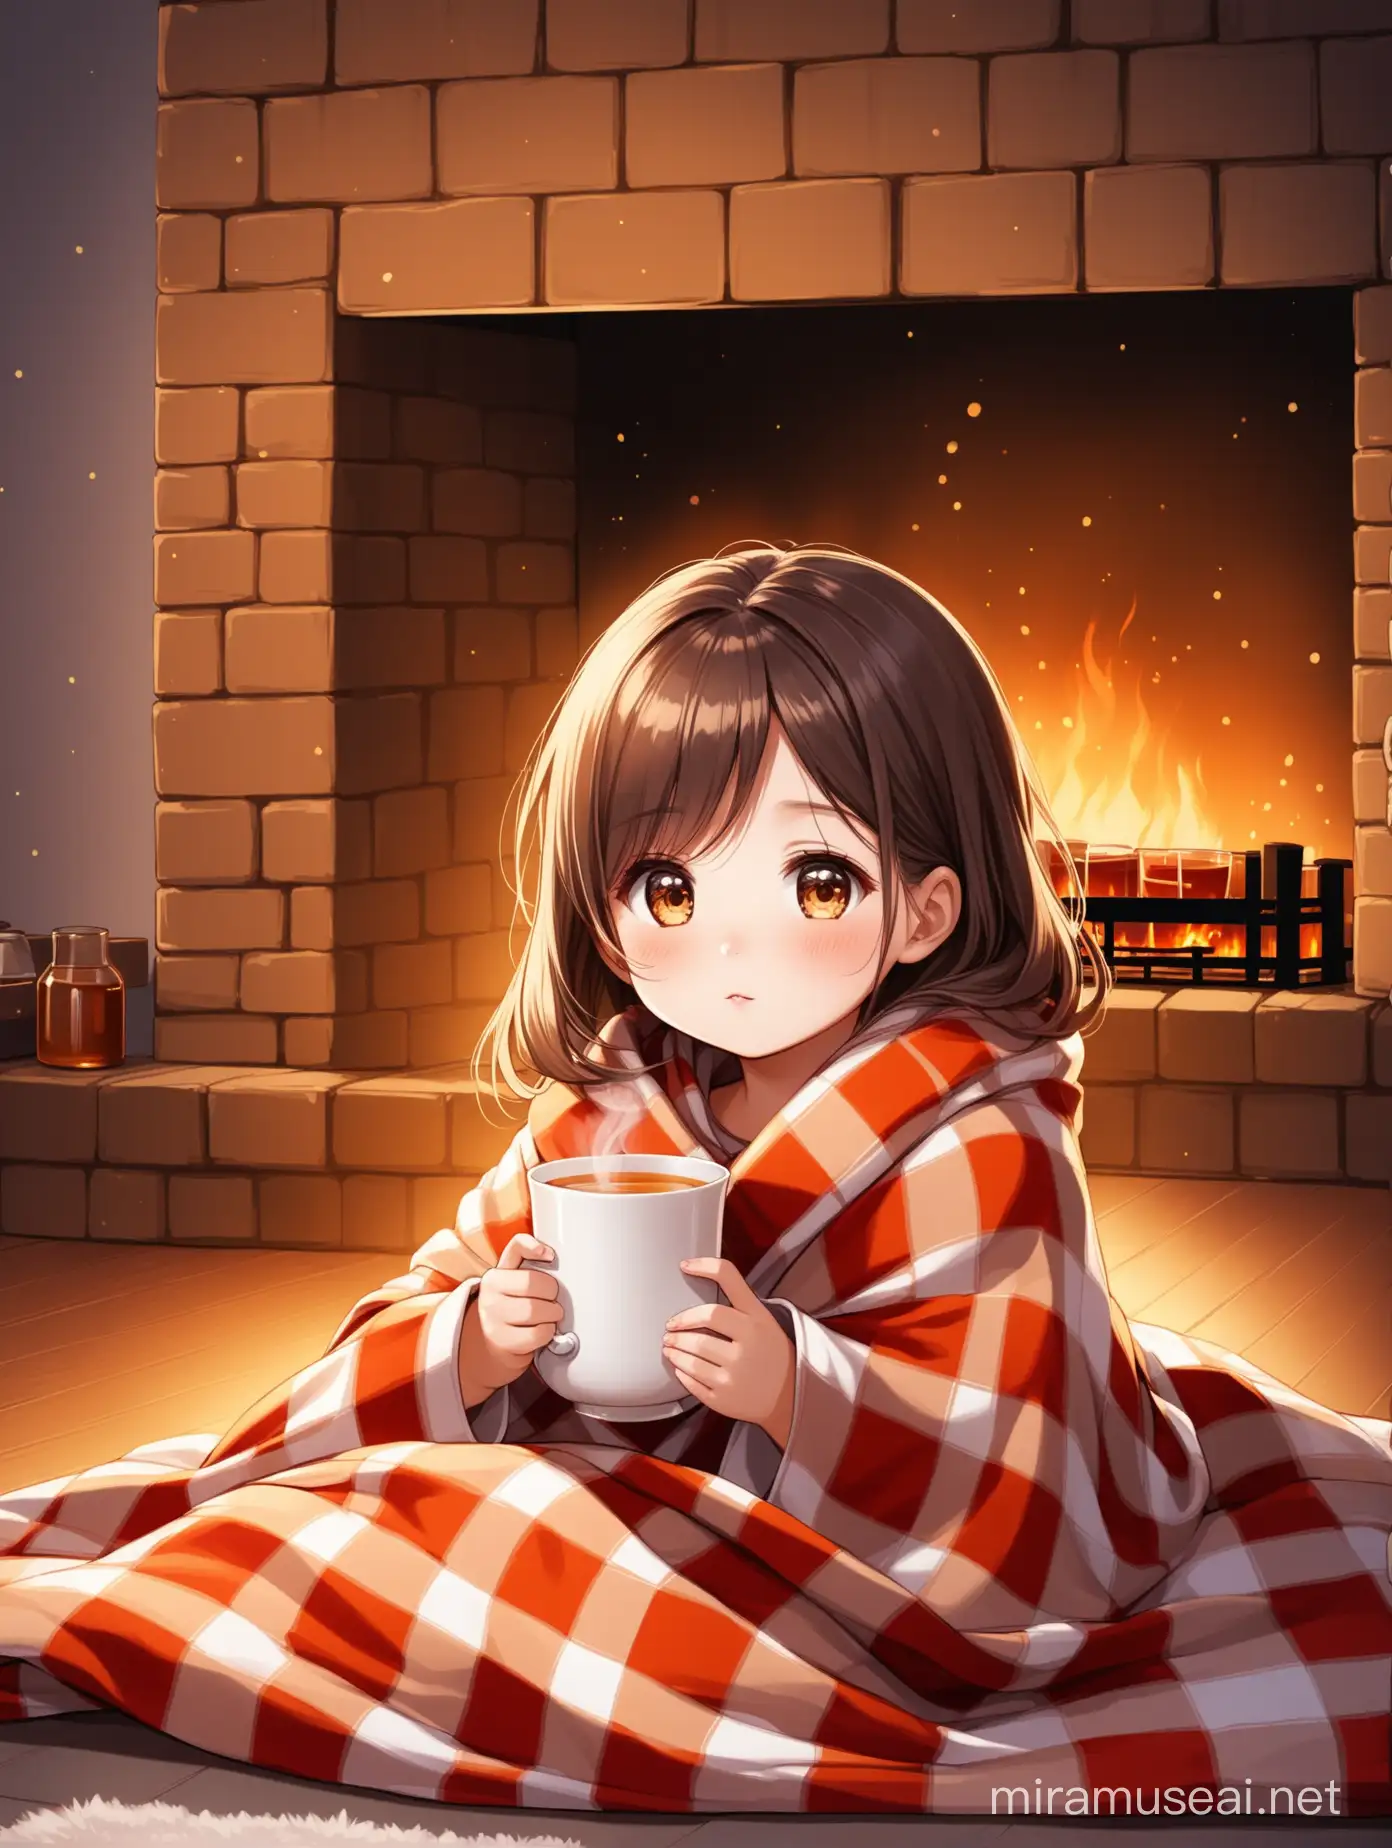 Cozy Winter Evening Little Girl in Checkered Blanket Sipping Hot Tea by Fireplace